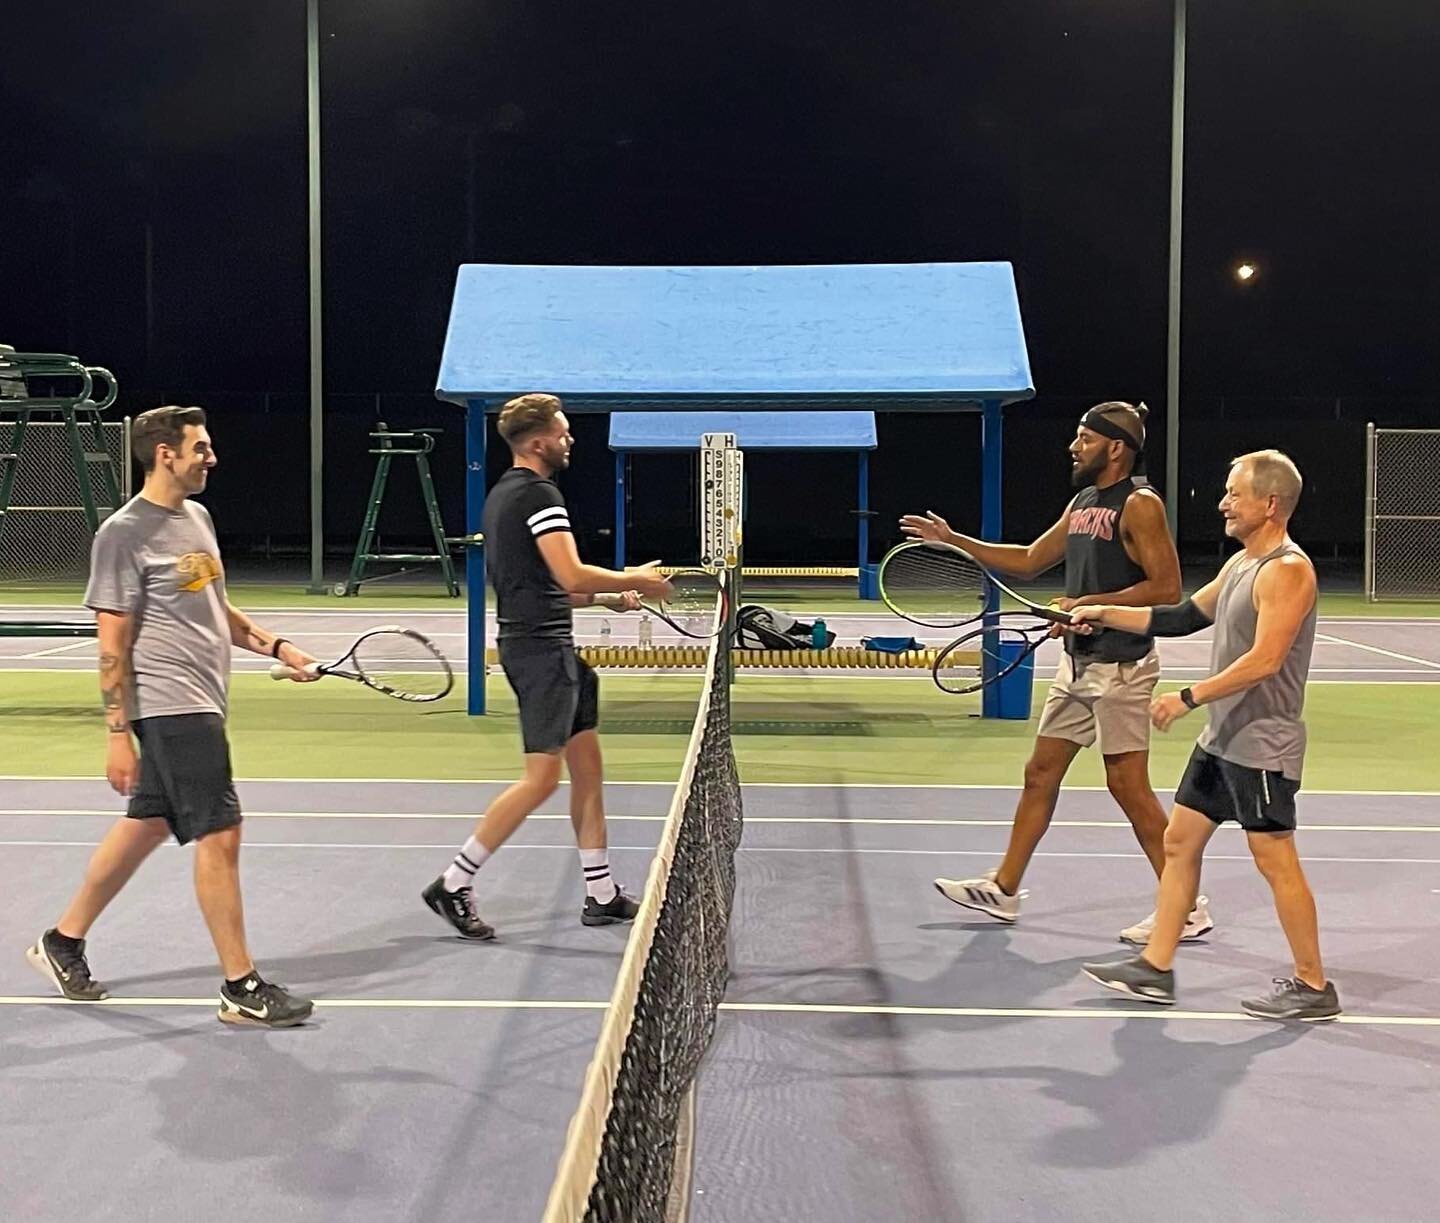 Coming down the final stretch of our summer doubles league! 2 more weeks of tourney play, then we&rsquo;ll wrap things up with our player awards &amp; social at @kobaltbarphoenix 🎾🎉
.
#tennis #phxtennis #vgltennis #lgbtpride 
📸: @markusmoonwalk